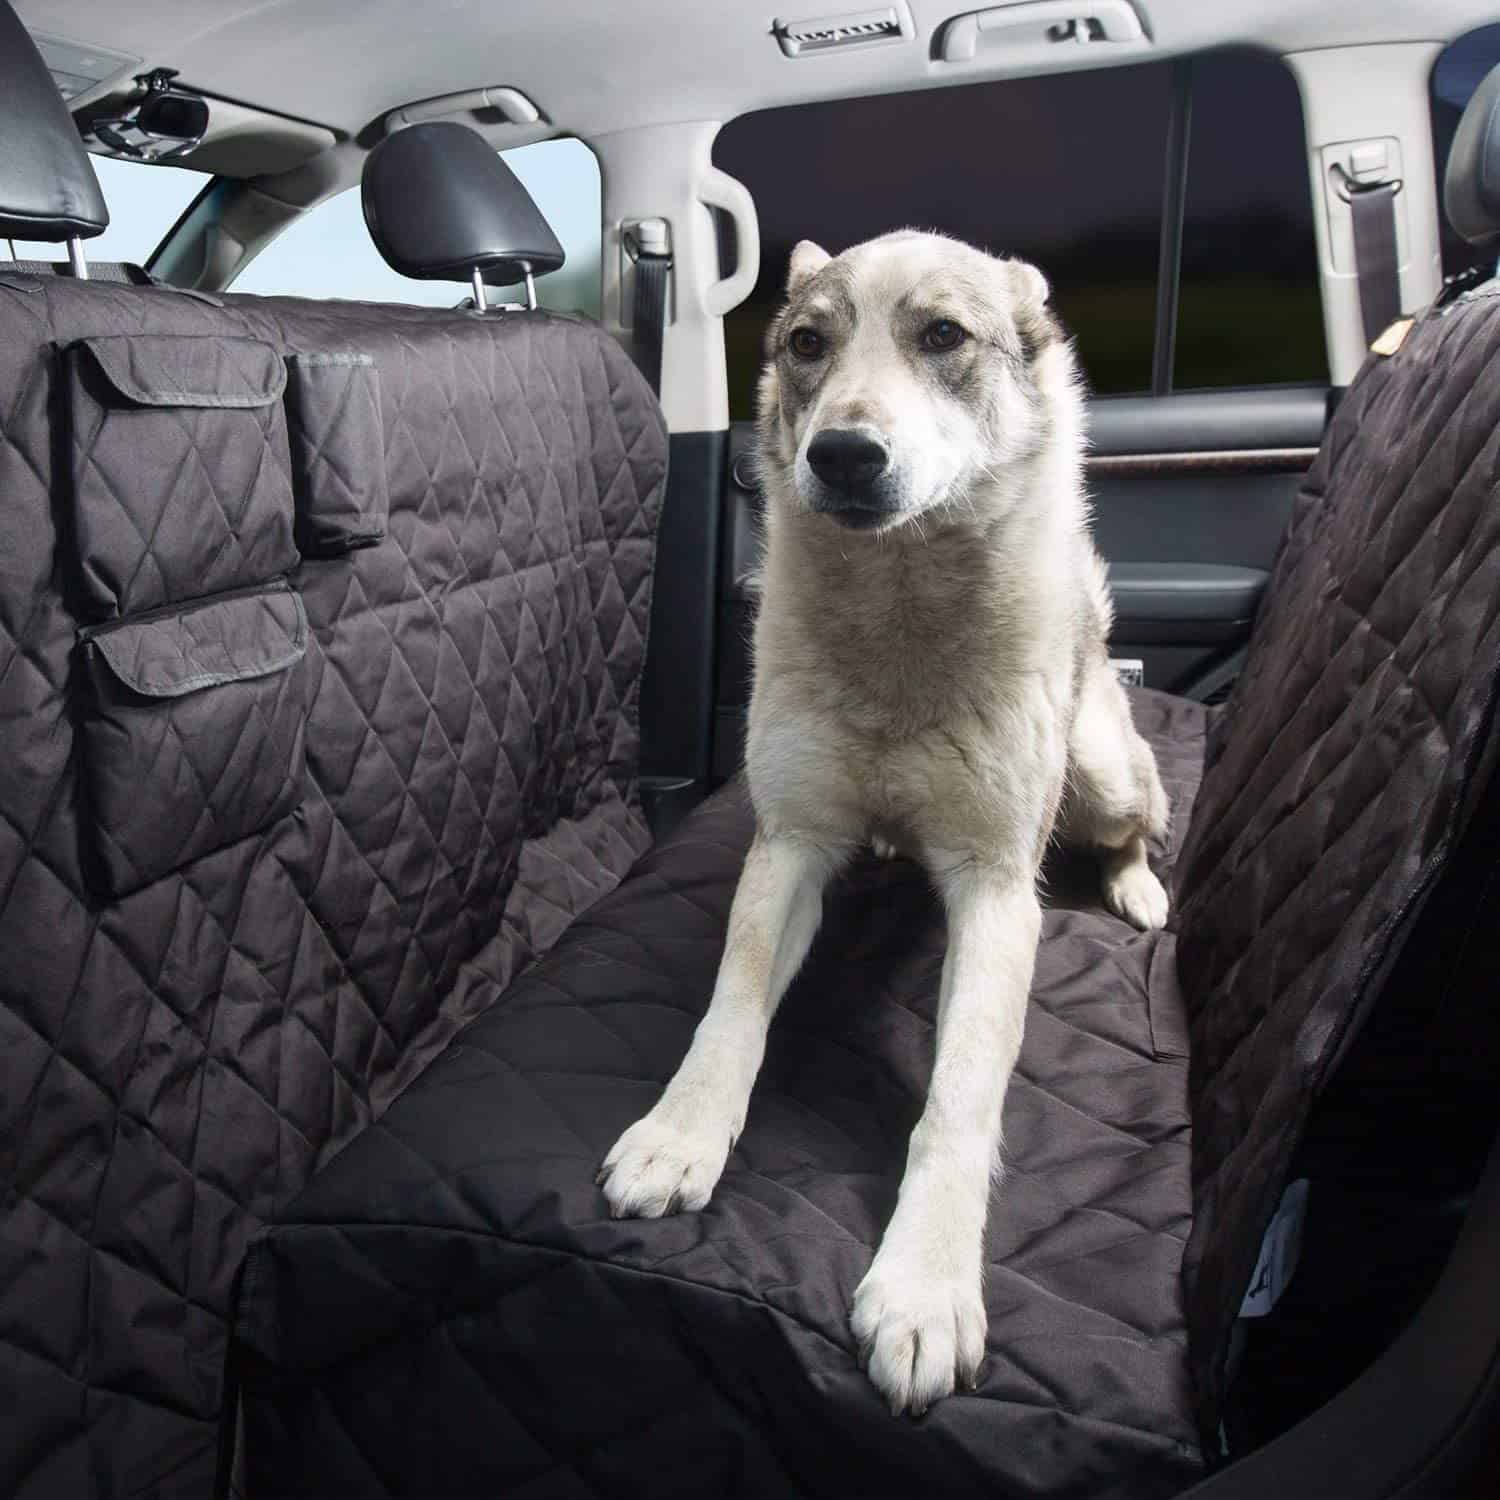 Dog sitting in the back seat on a seat cover